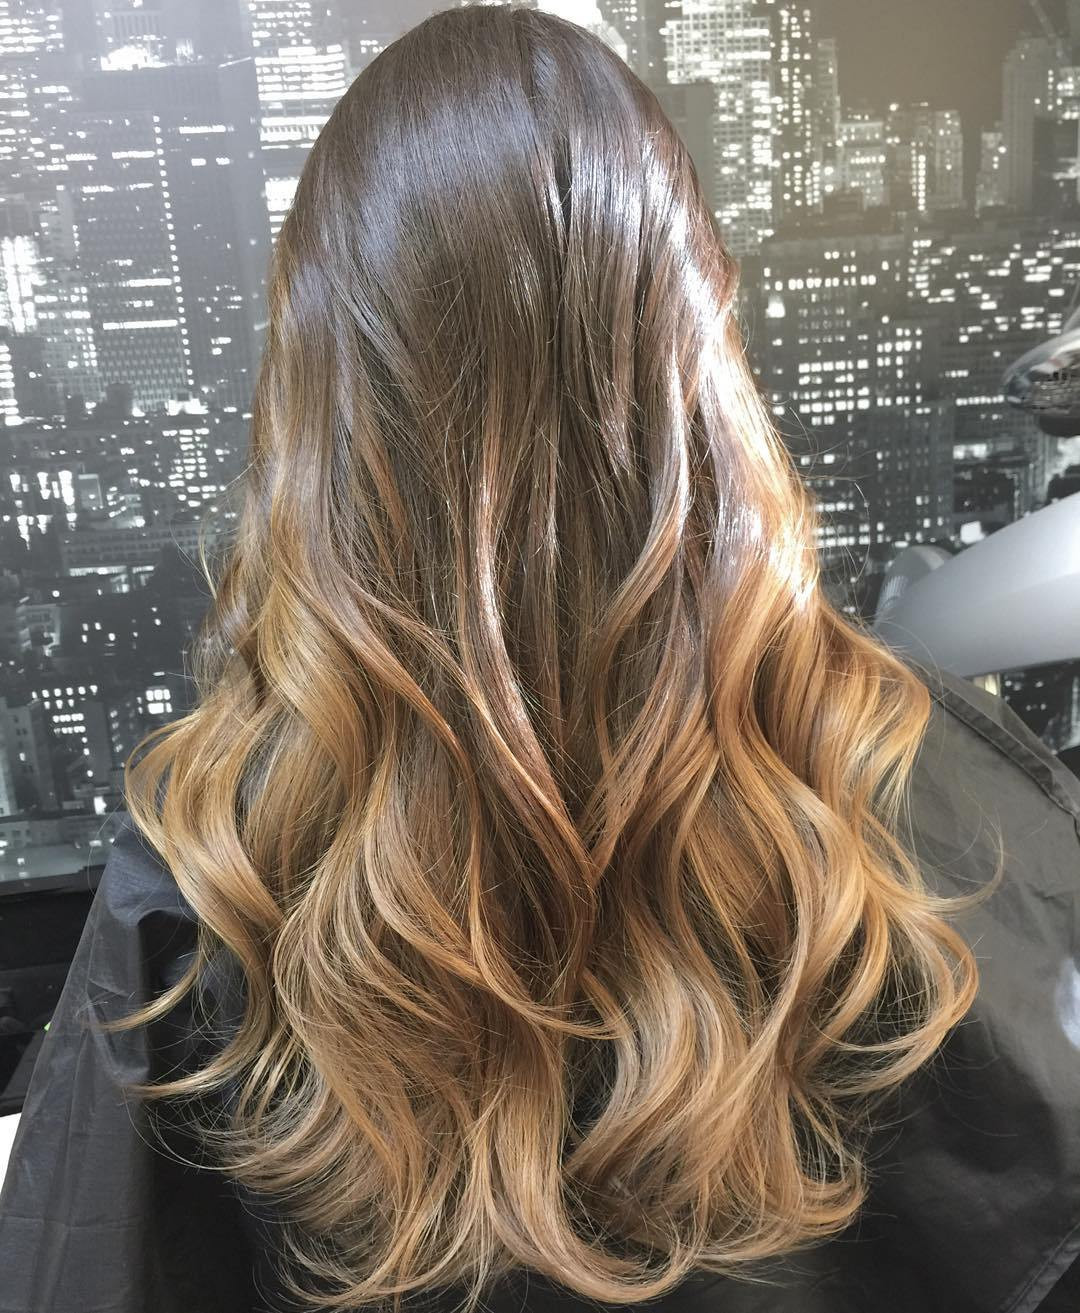 Long Ombre Hairstyles
 Your plete Ombre Hair Guide 53 Facts & Ideas for 2018